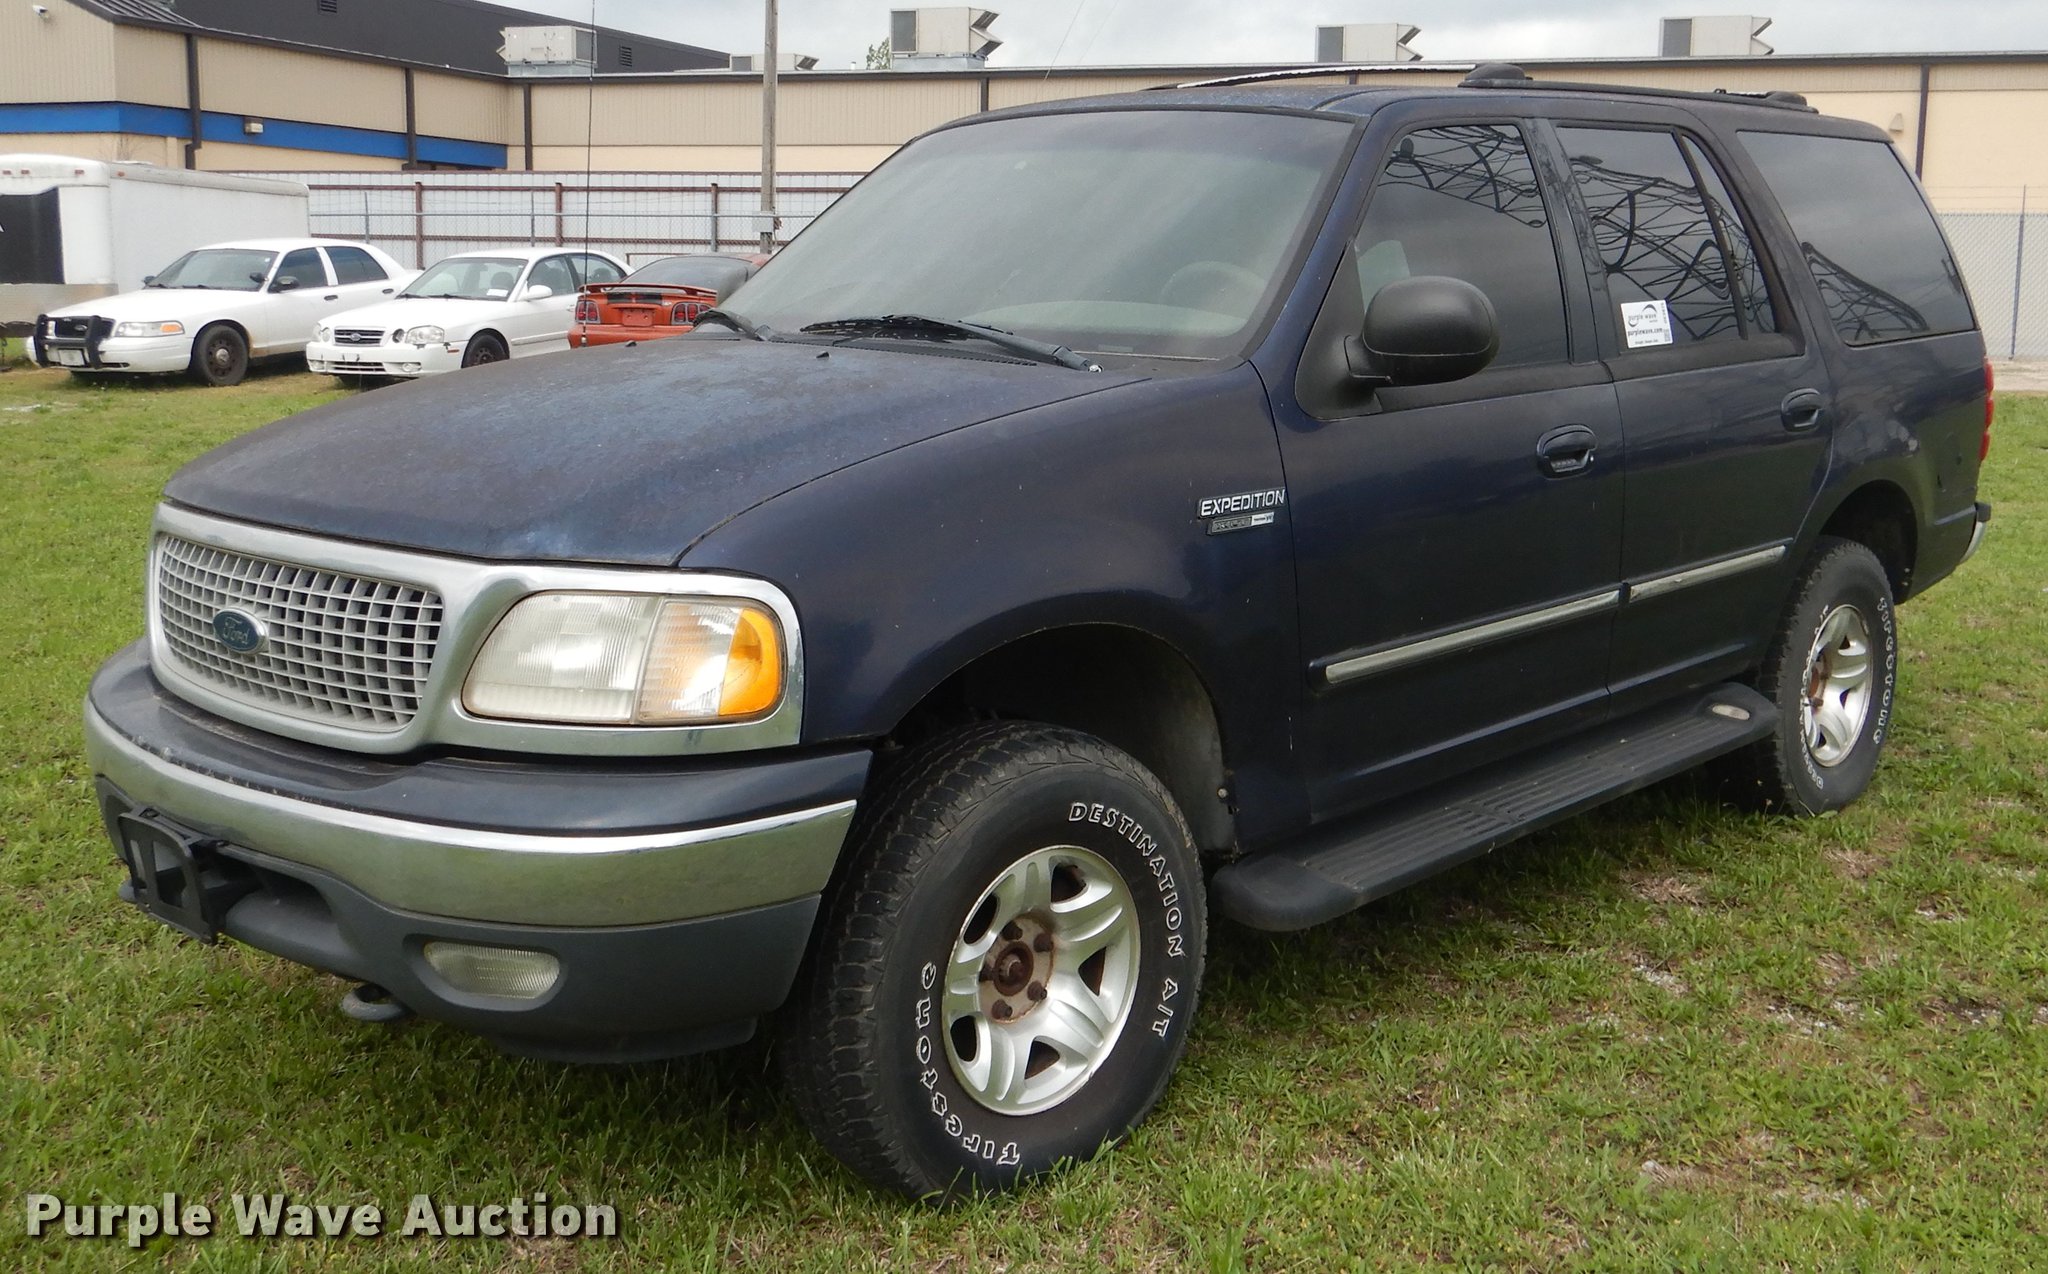 1999 Ford Expedition XLT SUV in Ada, OK | Item DE3975 sold | Purple Wave